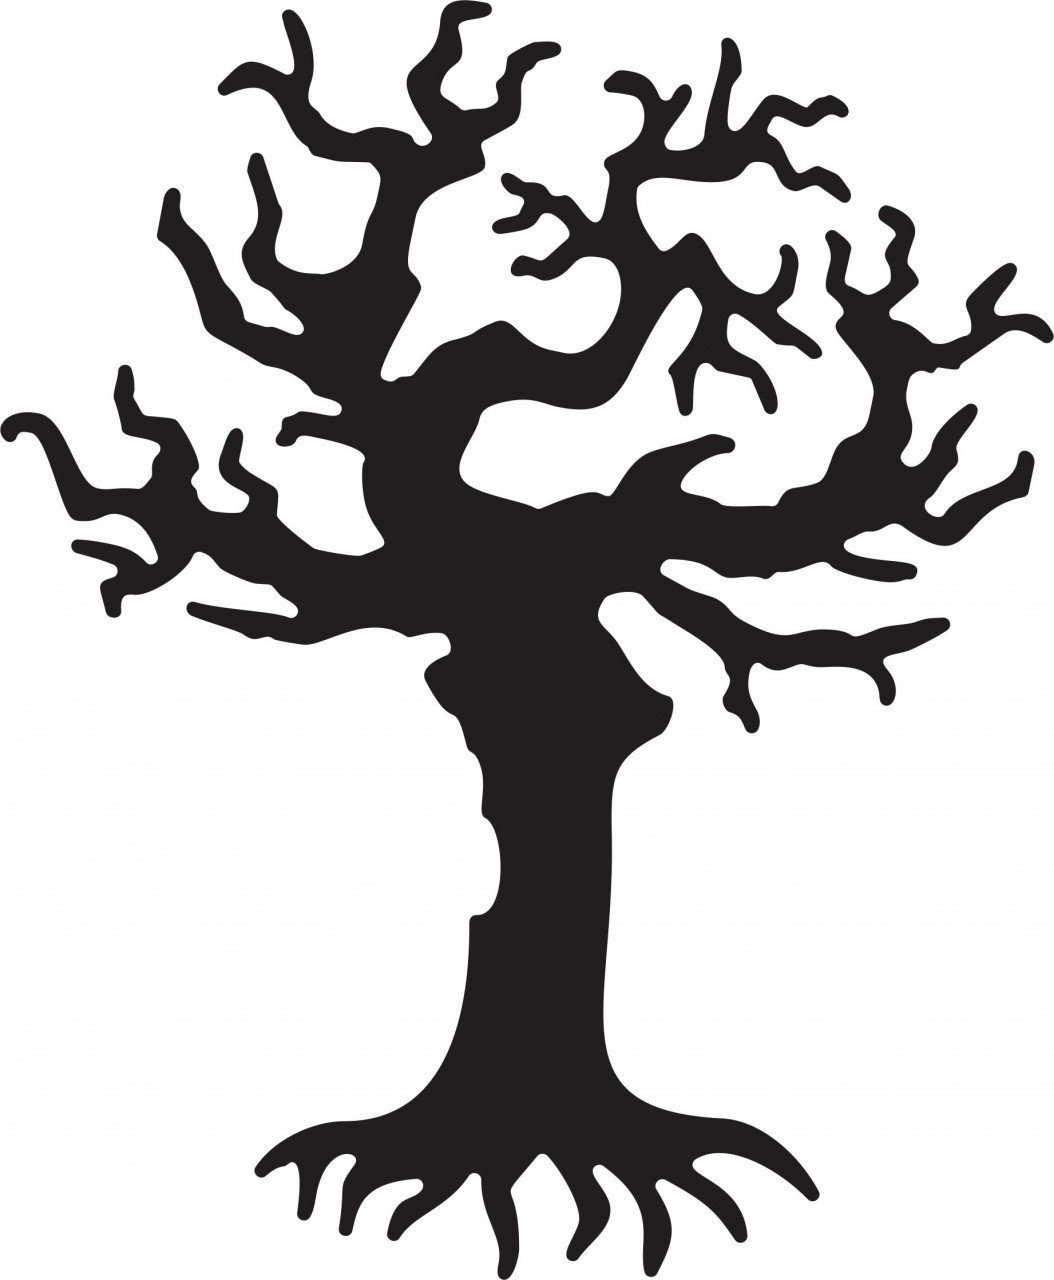 12 Scary Trees Pictures Free Cliparts That You Can Download To You